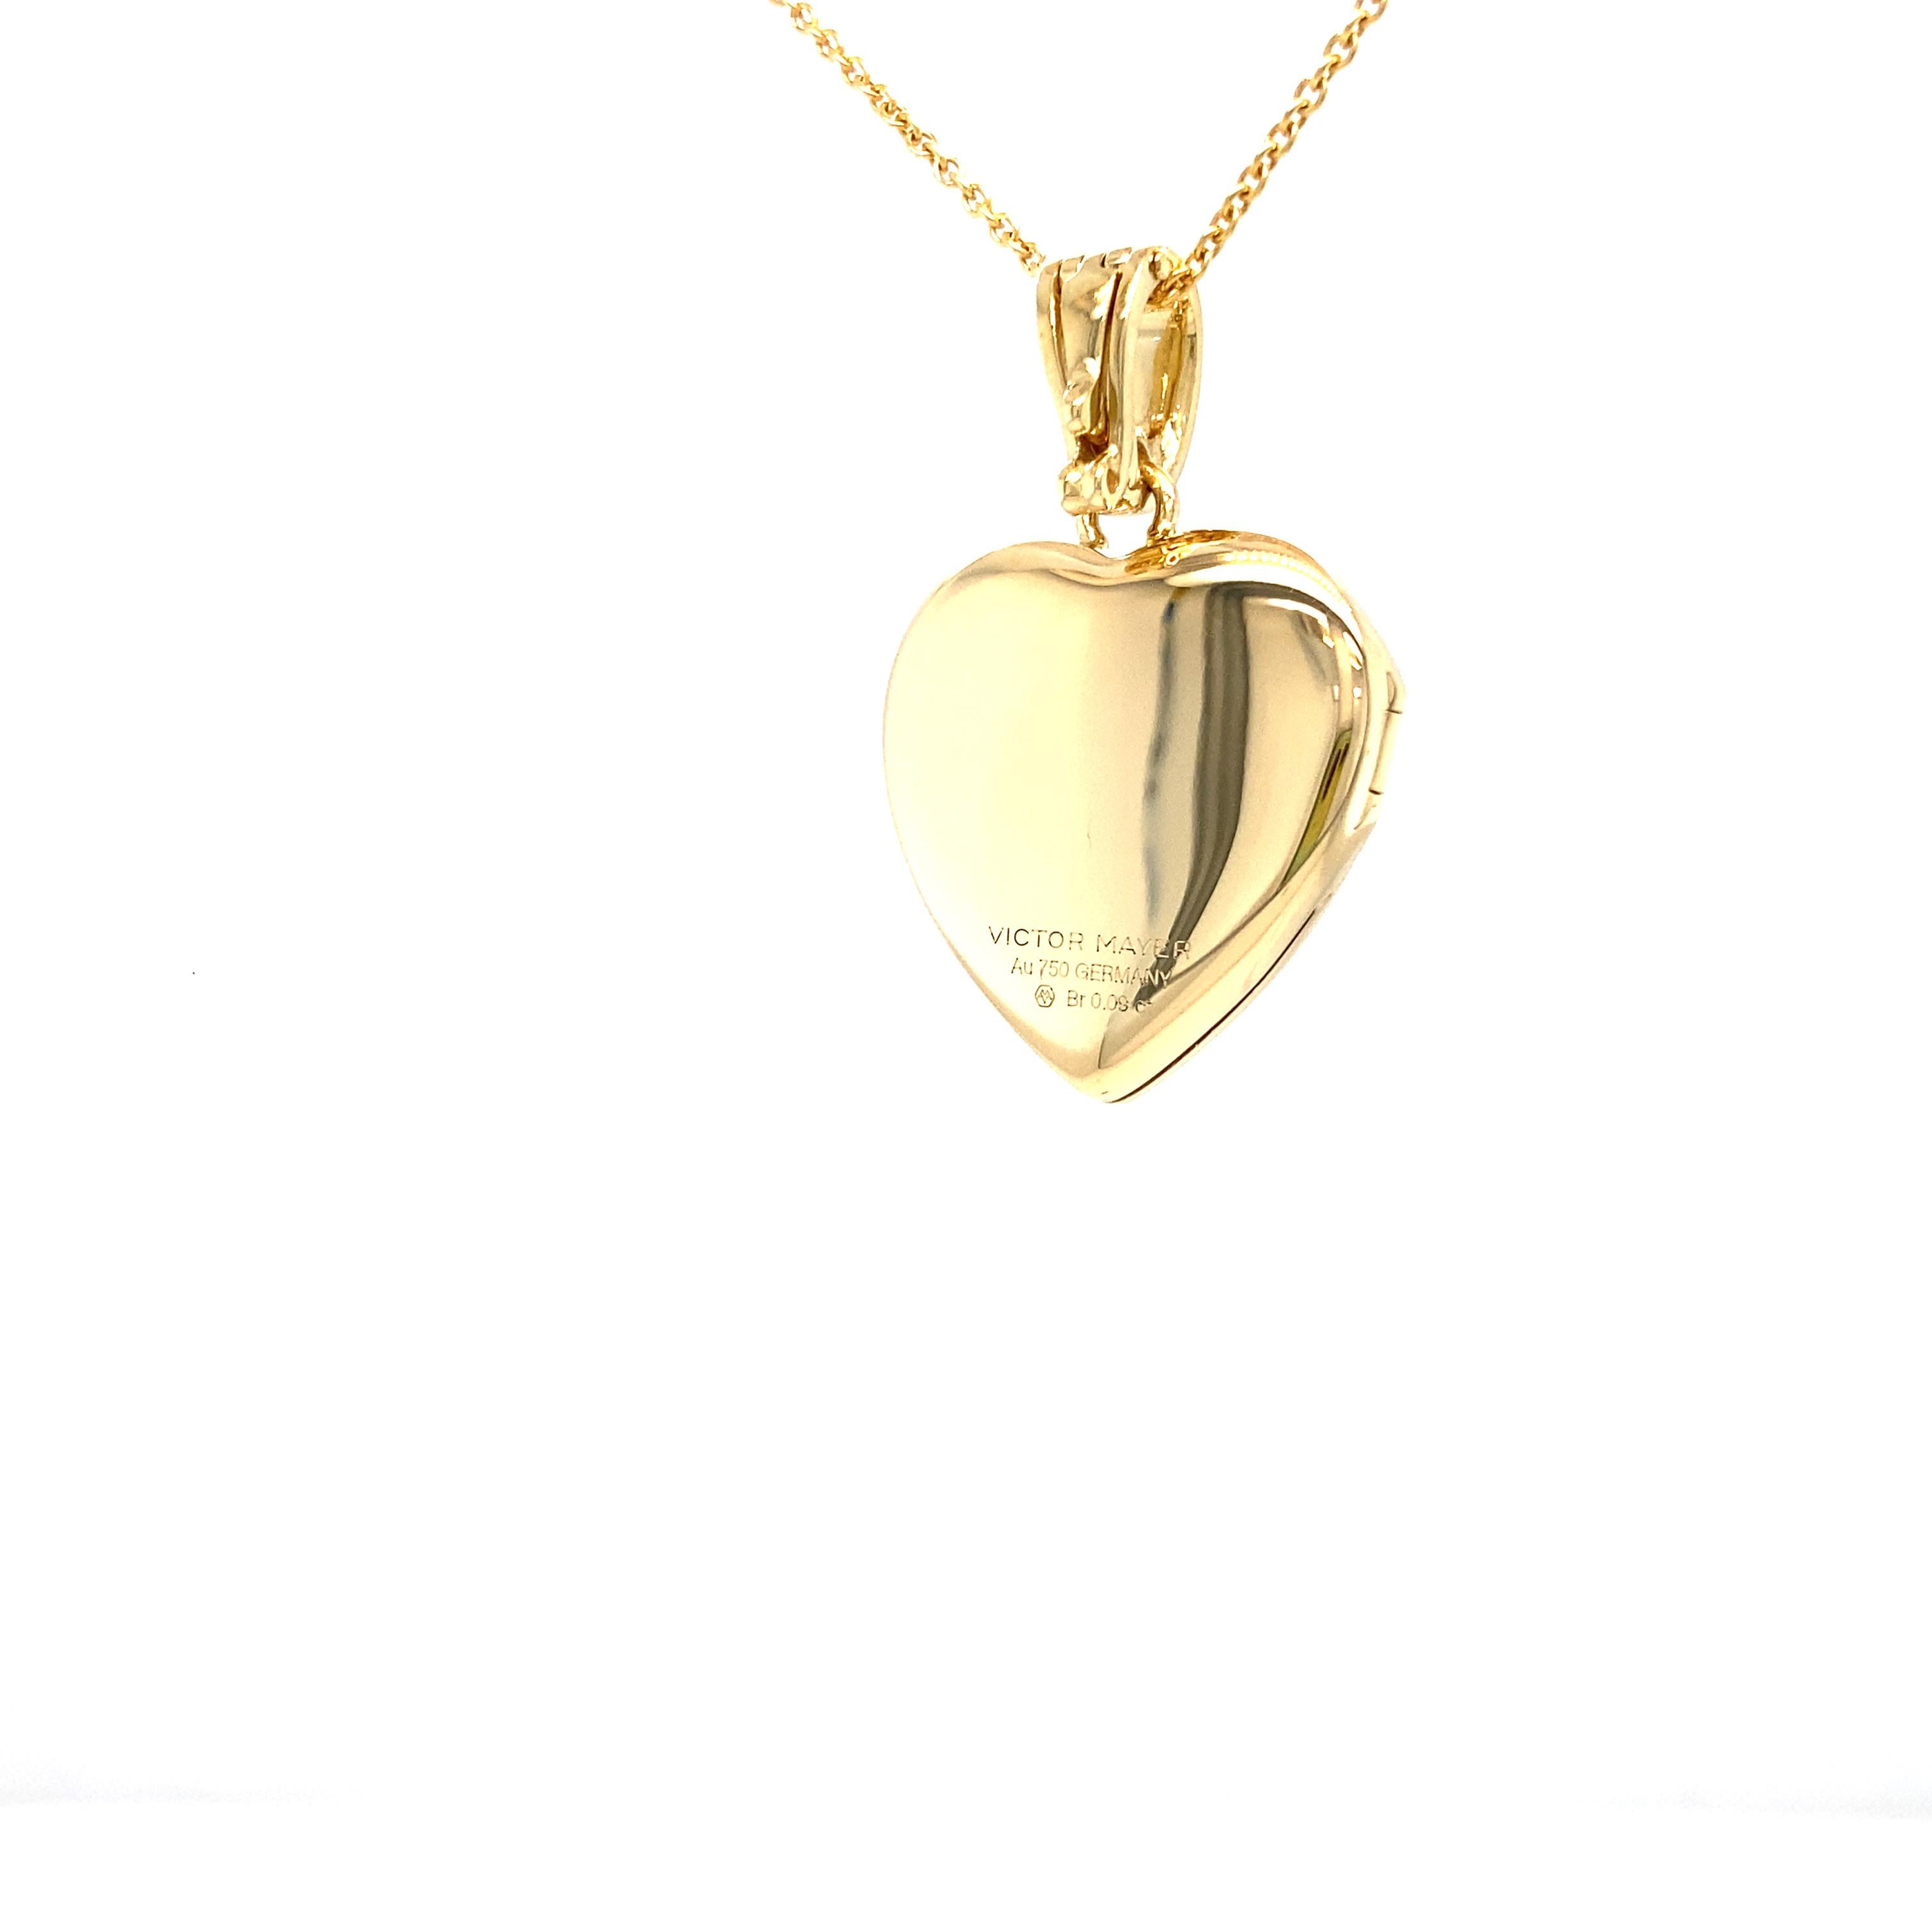 Brilliant Cut Polished Heart Locket Pendant Necklace - 18k Yellow Gold - 6 Diamonds 0.09 ct For Sale